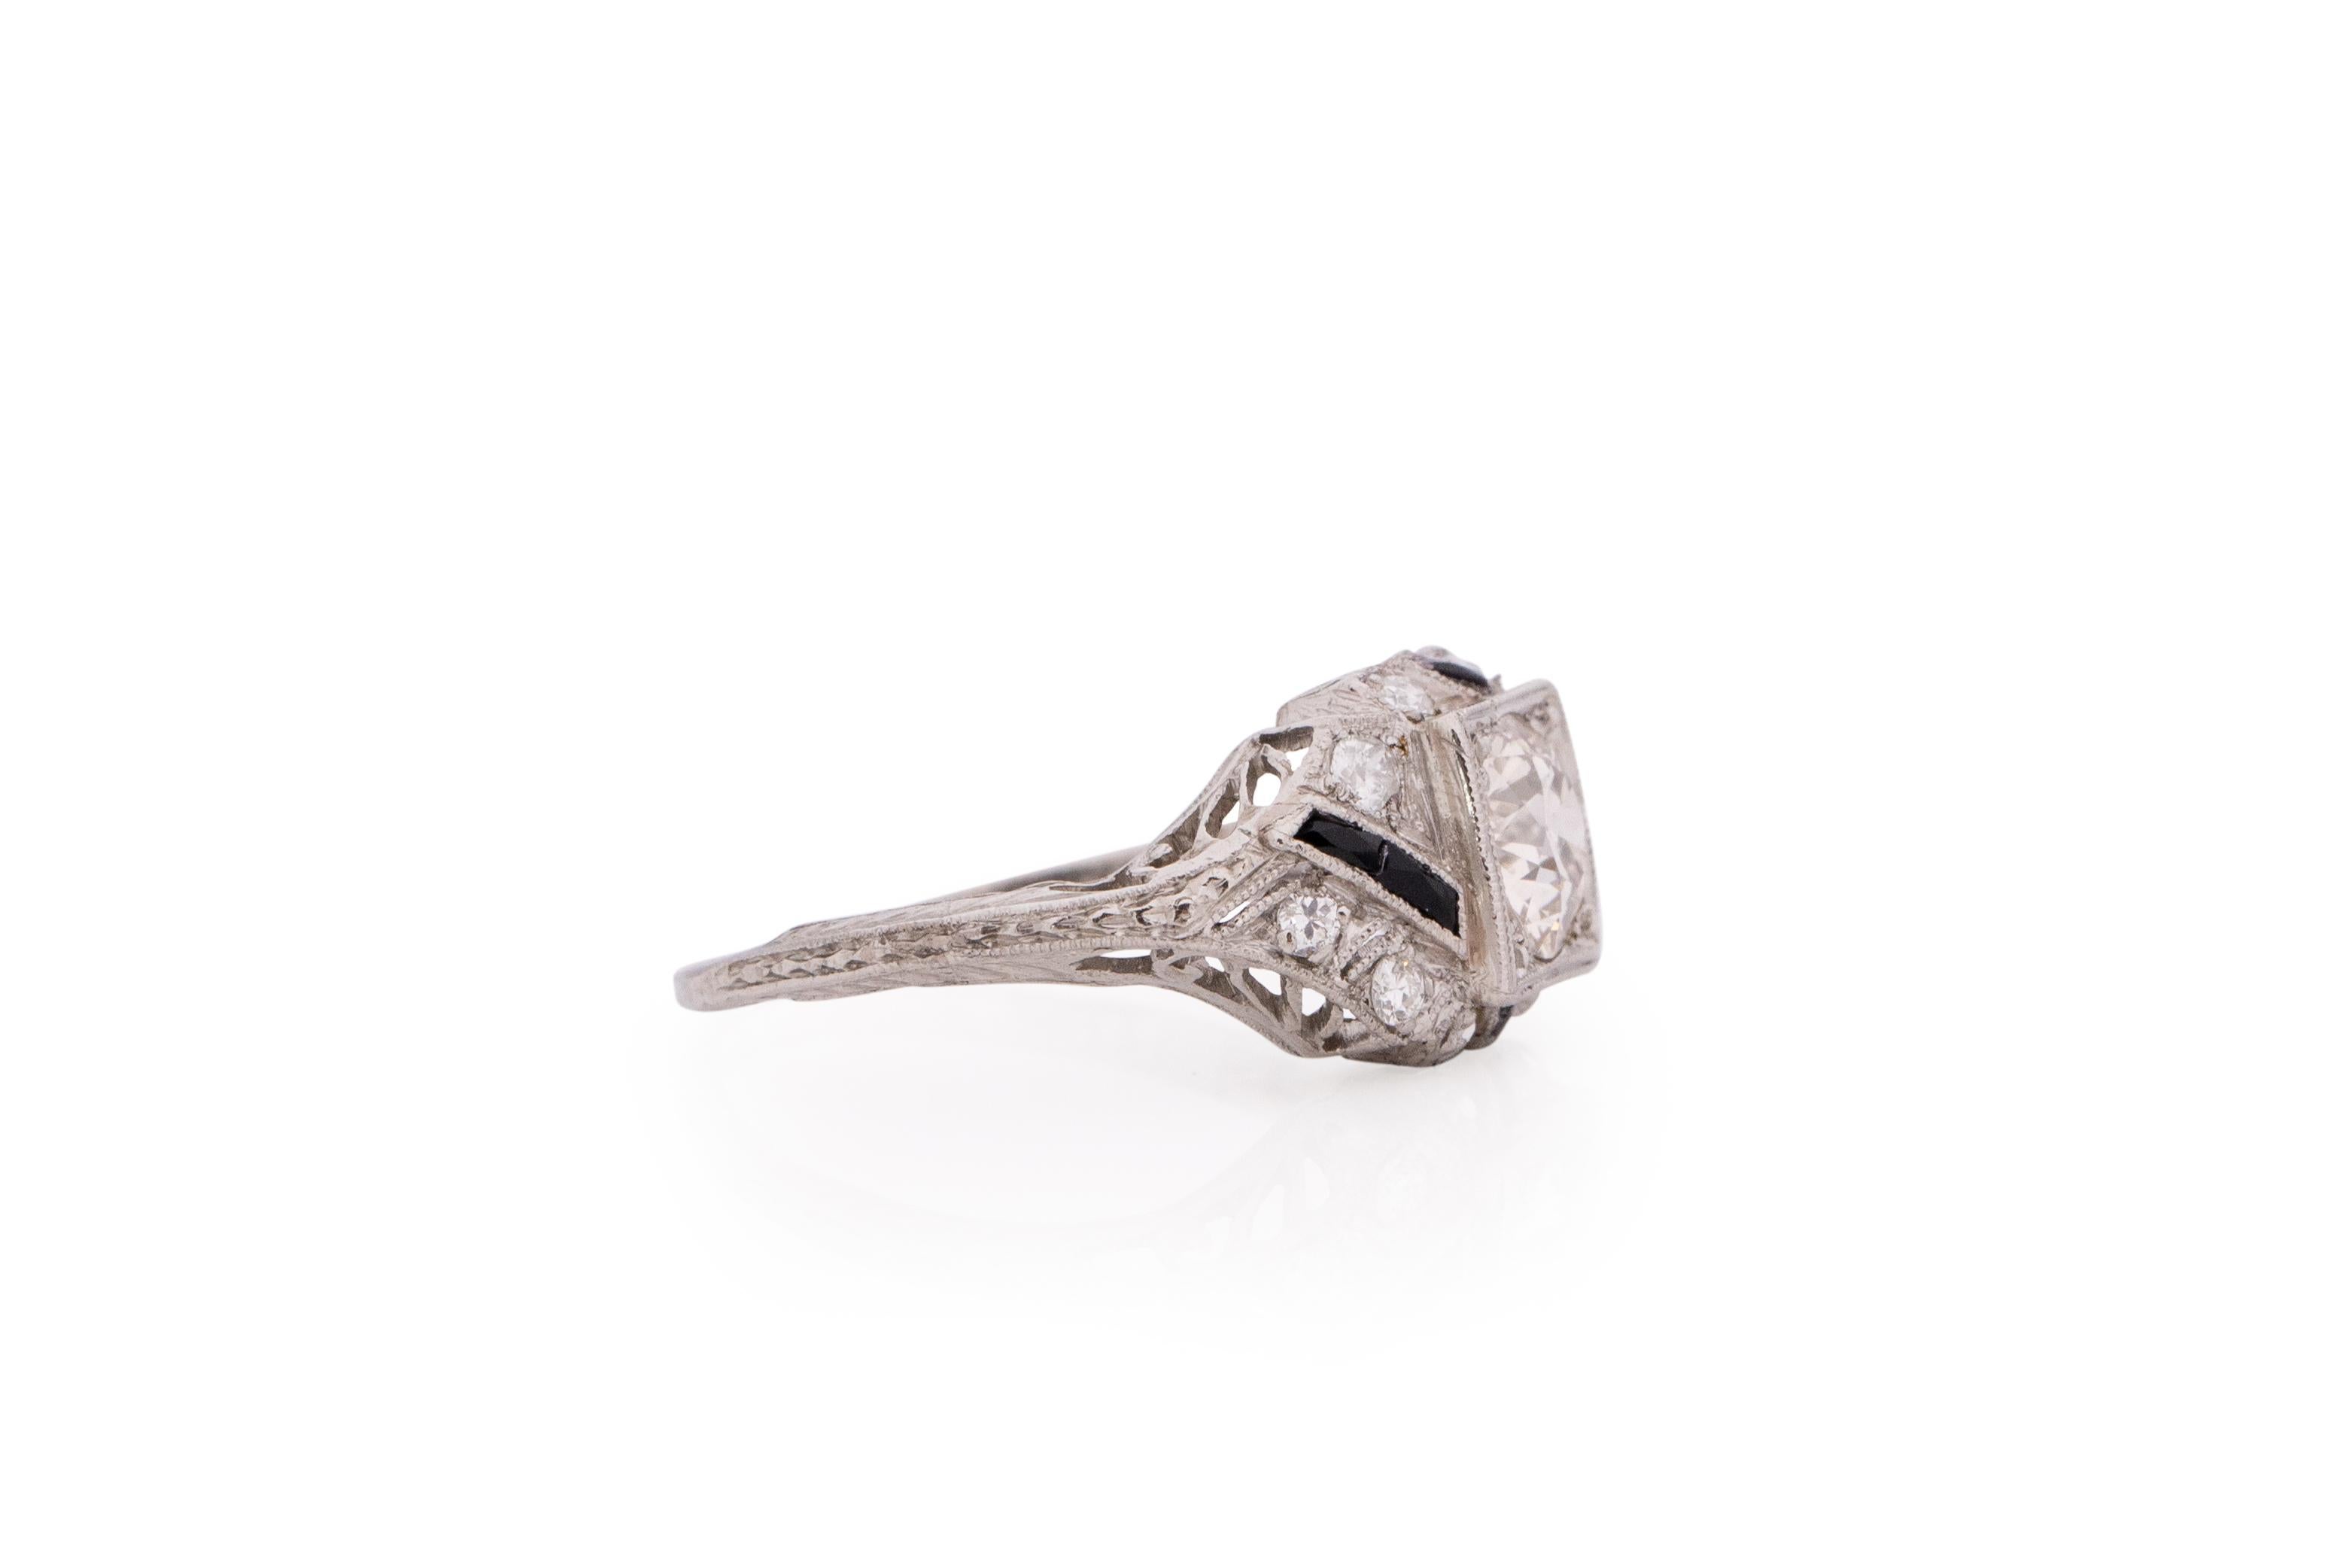 Item Details: 
Ring Size: 5.75
Metal Type: Platinum [Hallmarked, and Tested]
Weight: 3.7 grams

Center Diamond Details:
Weight: .85
Cut: Old European brilliant
Color: J
Clarity: SI2

Side Stone Details:
Weight: .25 carat total weight
Cut: Old